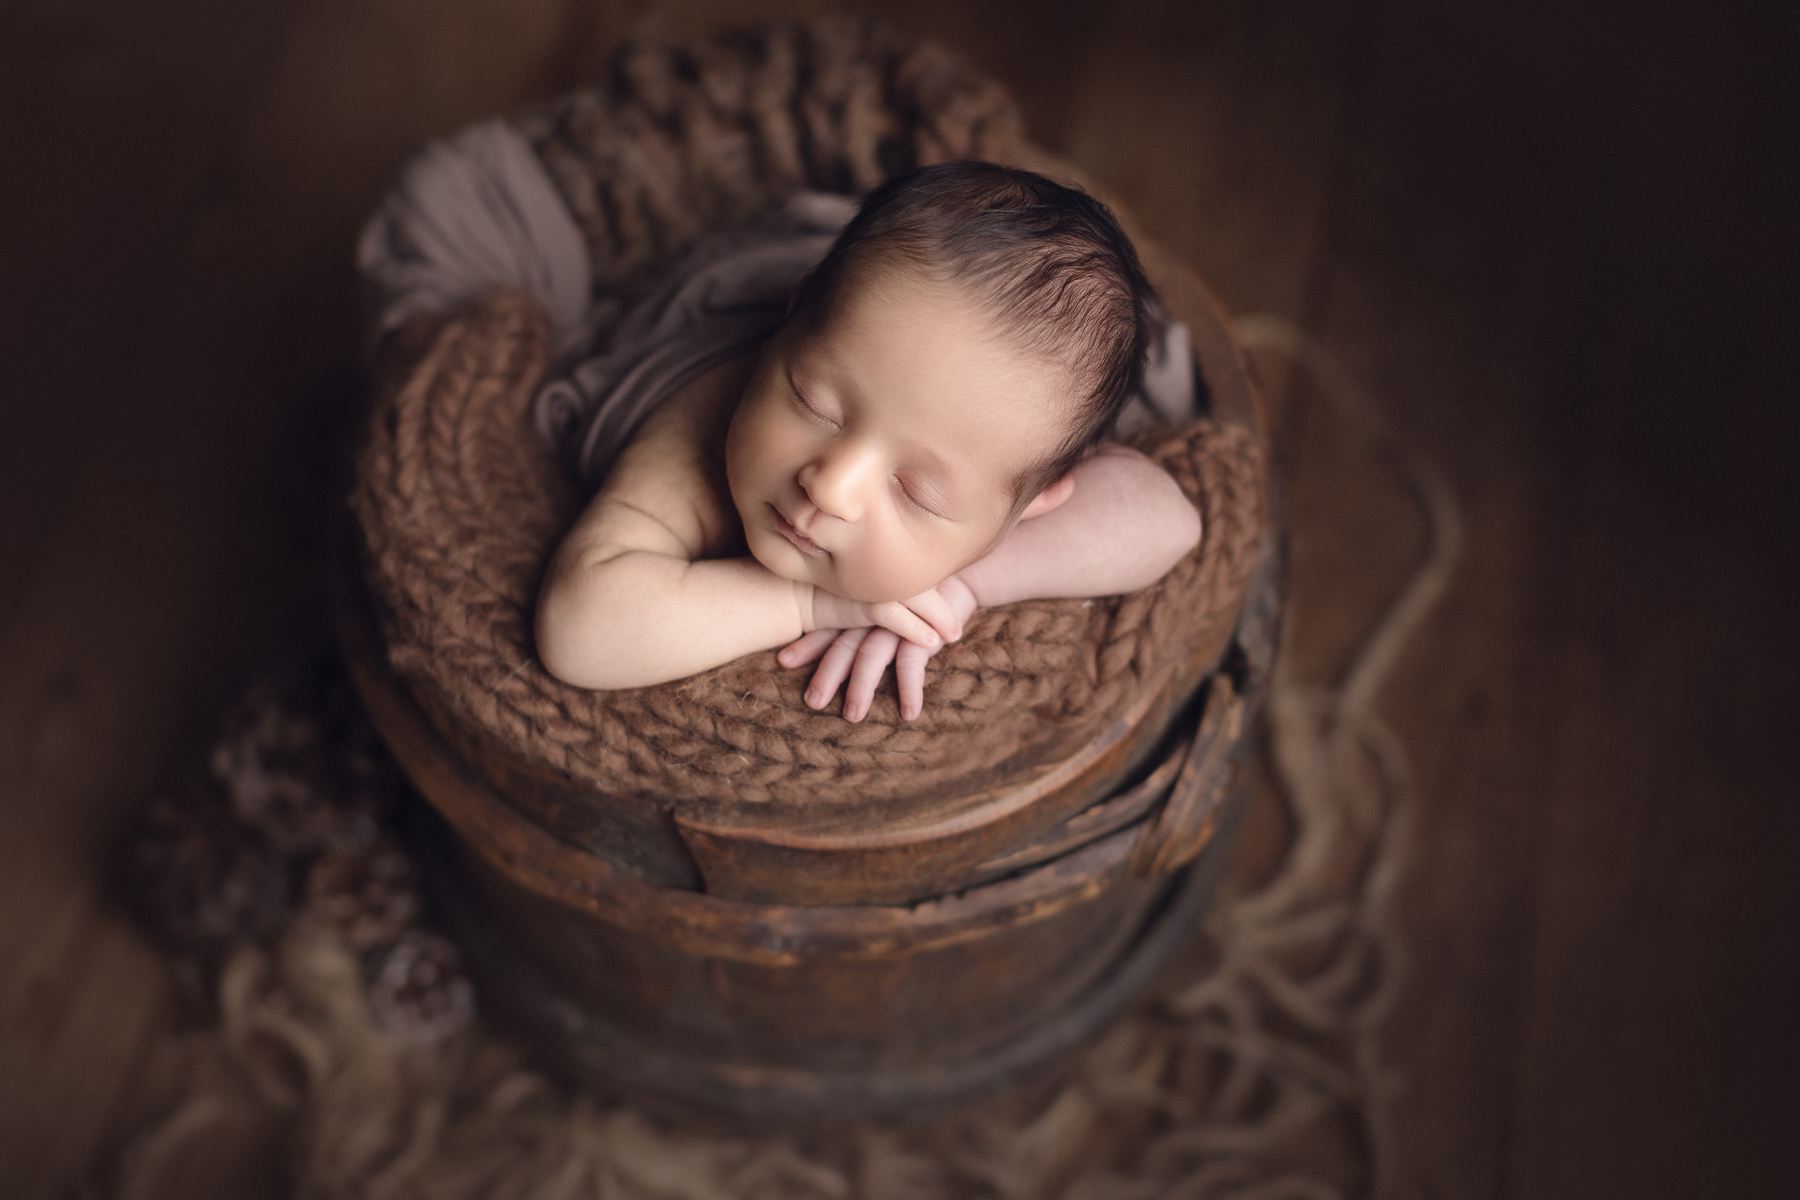 newborn photography Vancouver - burnaby and surrey - baby boy on a brown bucket